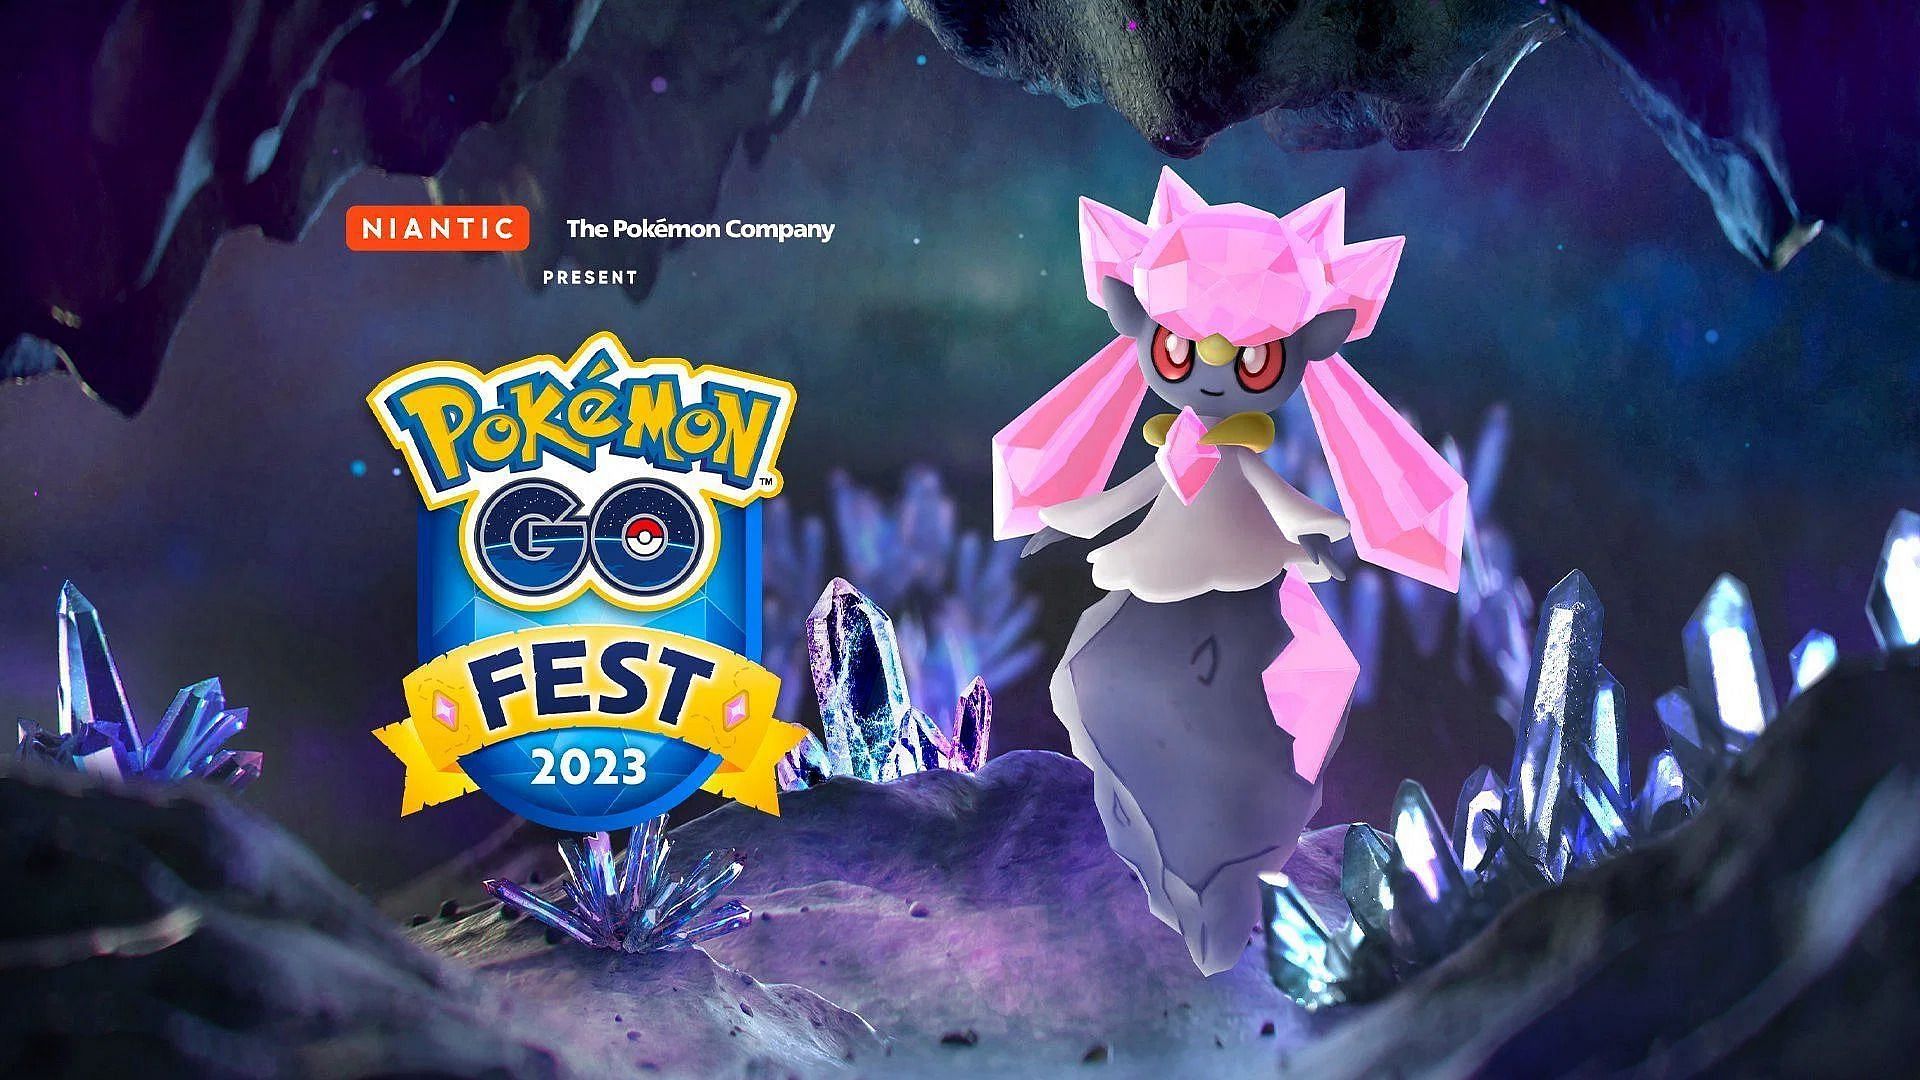 Diancie can currently be encountered in Pokemon GO Fest 2023 (Image via Niantic)